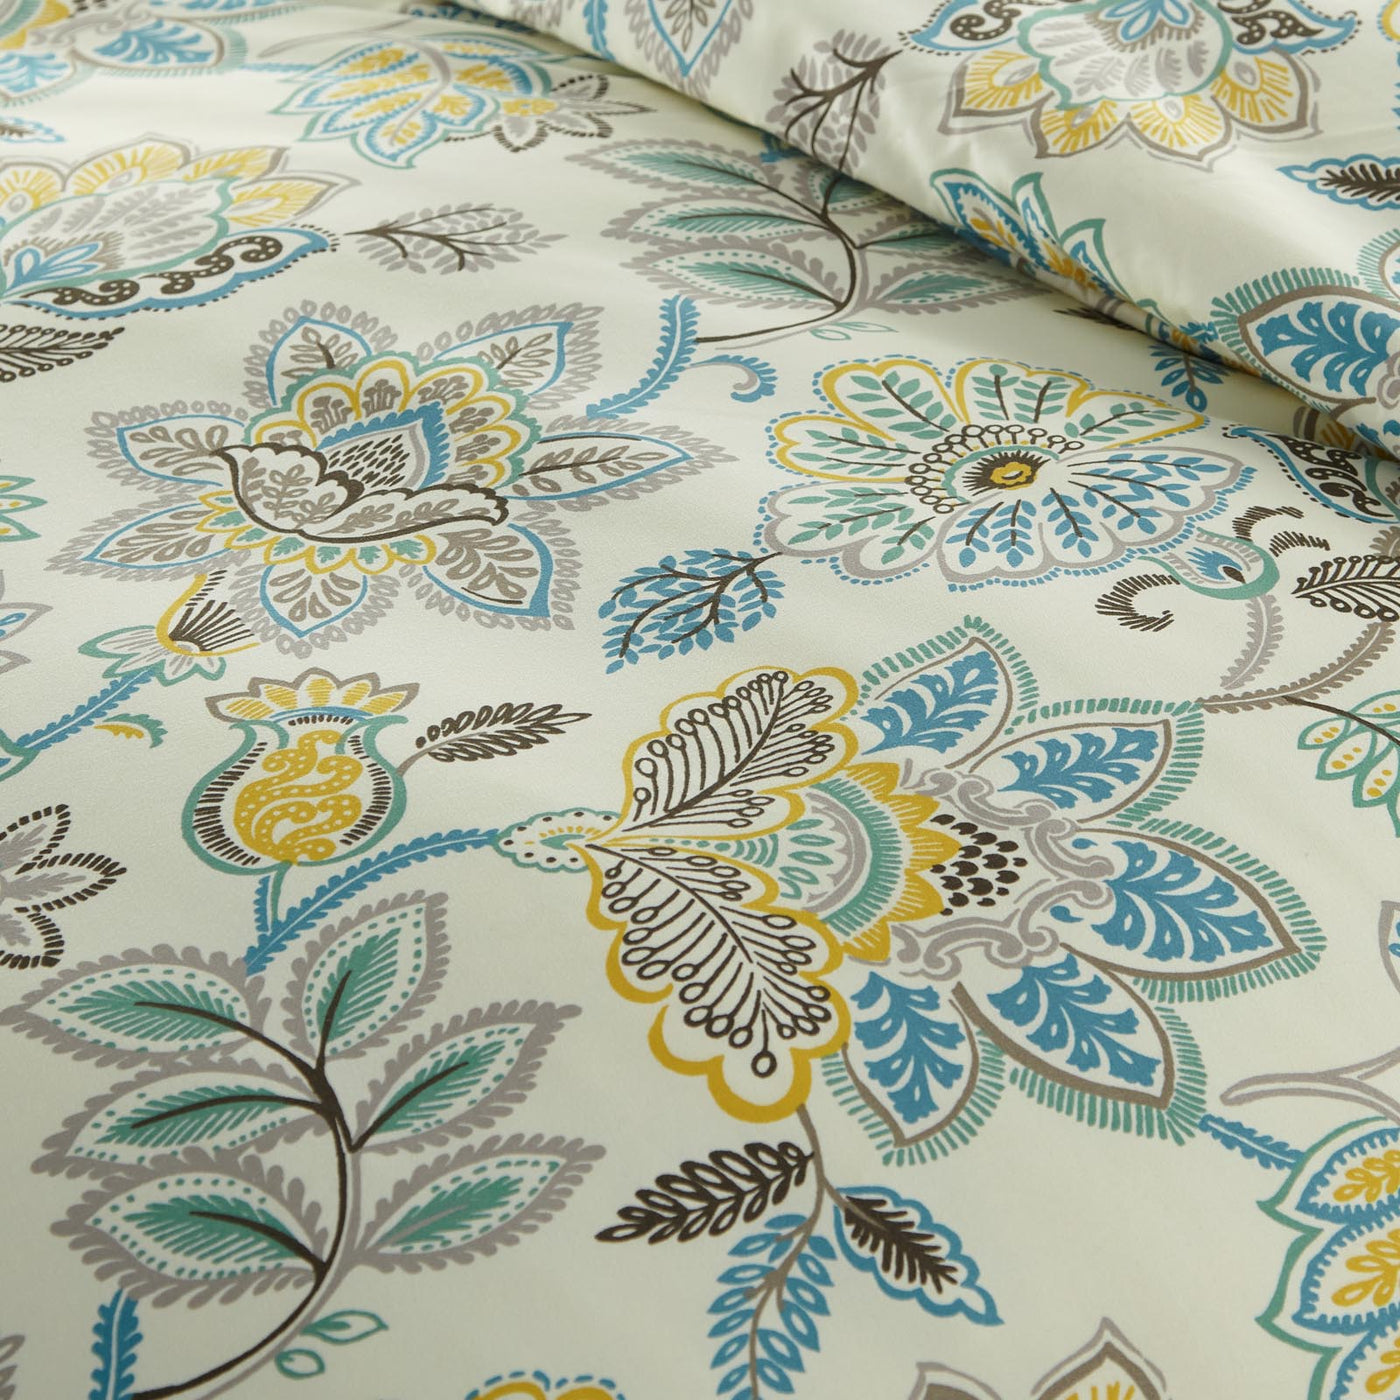 Details and Print Pattern of Global Paisley Comforter Set in Cream#color_global-paisley-cream